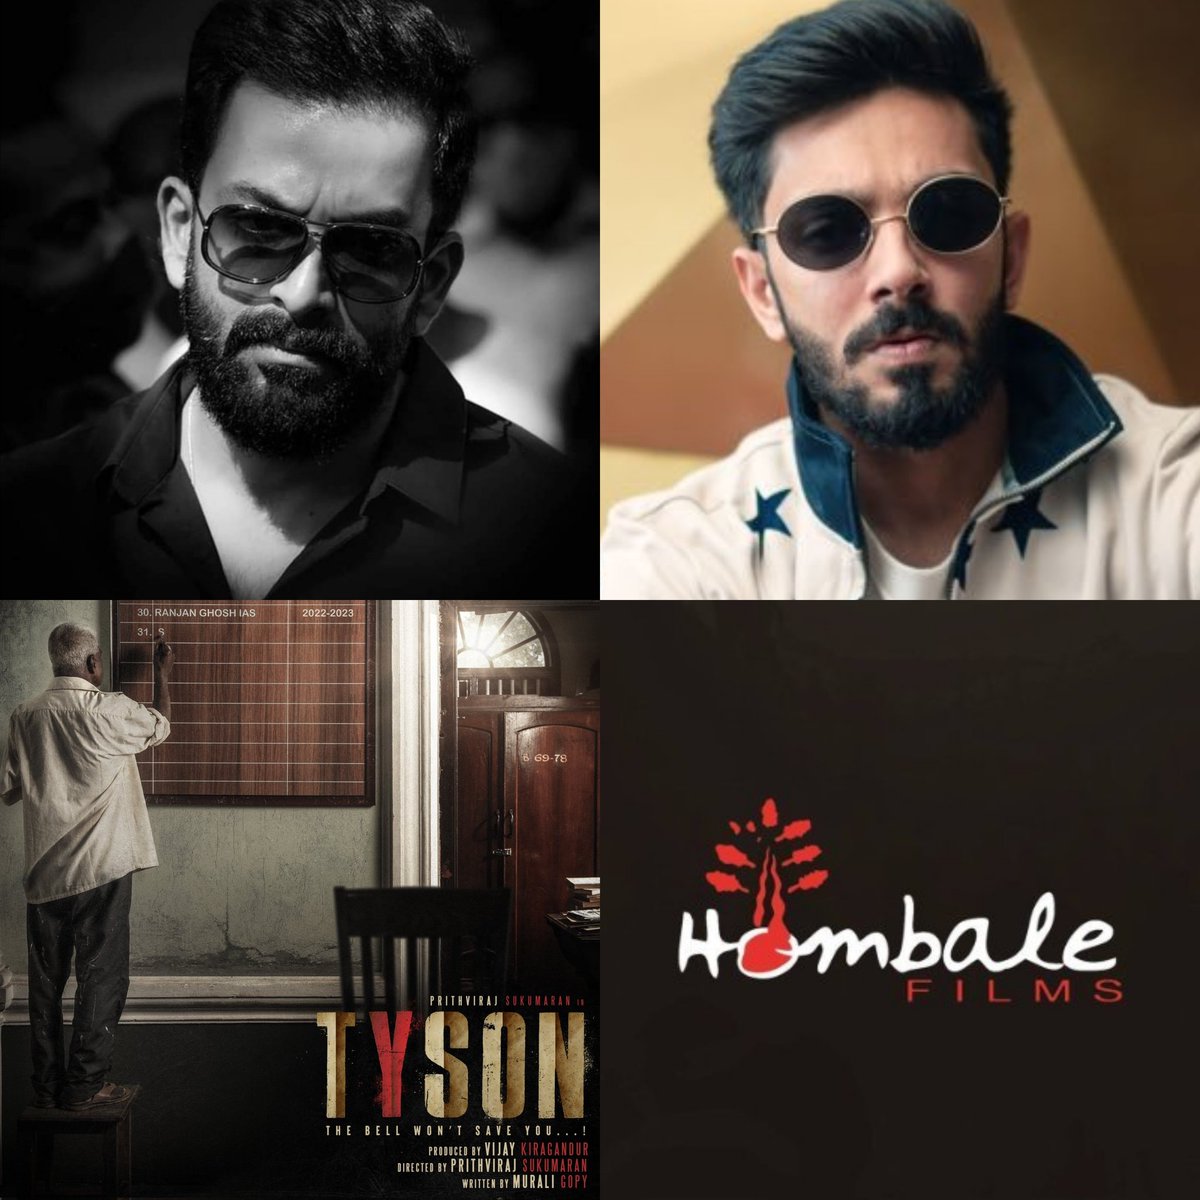 #Anirudh to Mollywood.! 👀🔥
#Prithviraj's upcoming directorial #Tyson will be Anirudh's Malayalam debut.

Starring and Directed by #PrithvirajSukumaran

Written by #MuraliGopi
Combo after #Lucifer #L2E

Produced by #HombaleFilms - #KGF #Kantaara

#Anirudh Musical
Movie hype 📈🔥